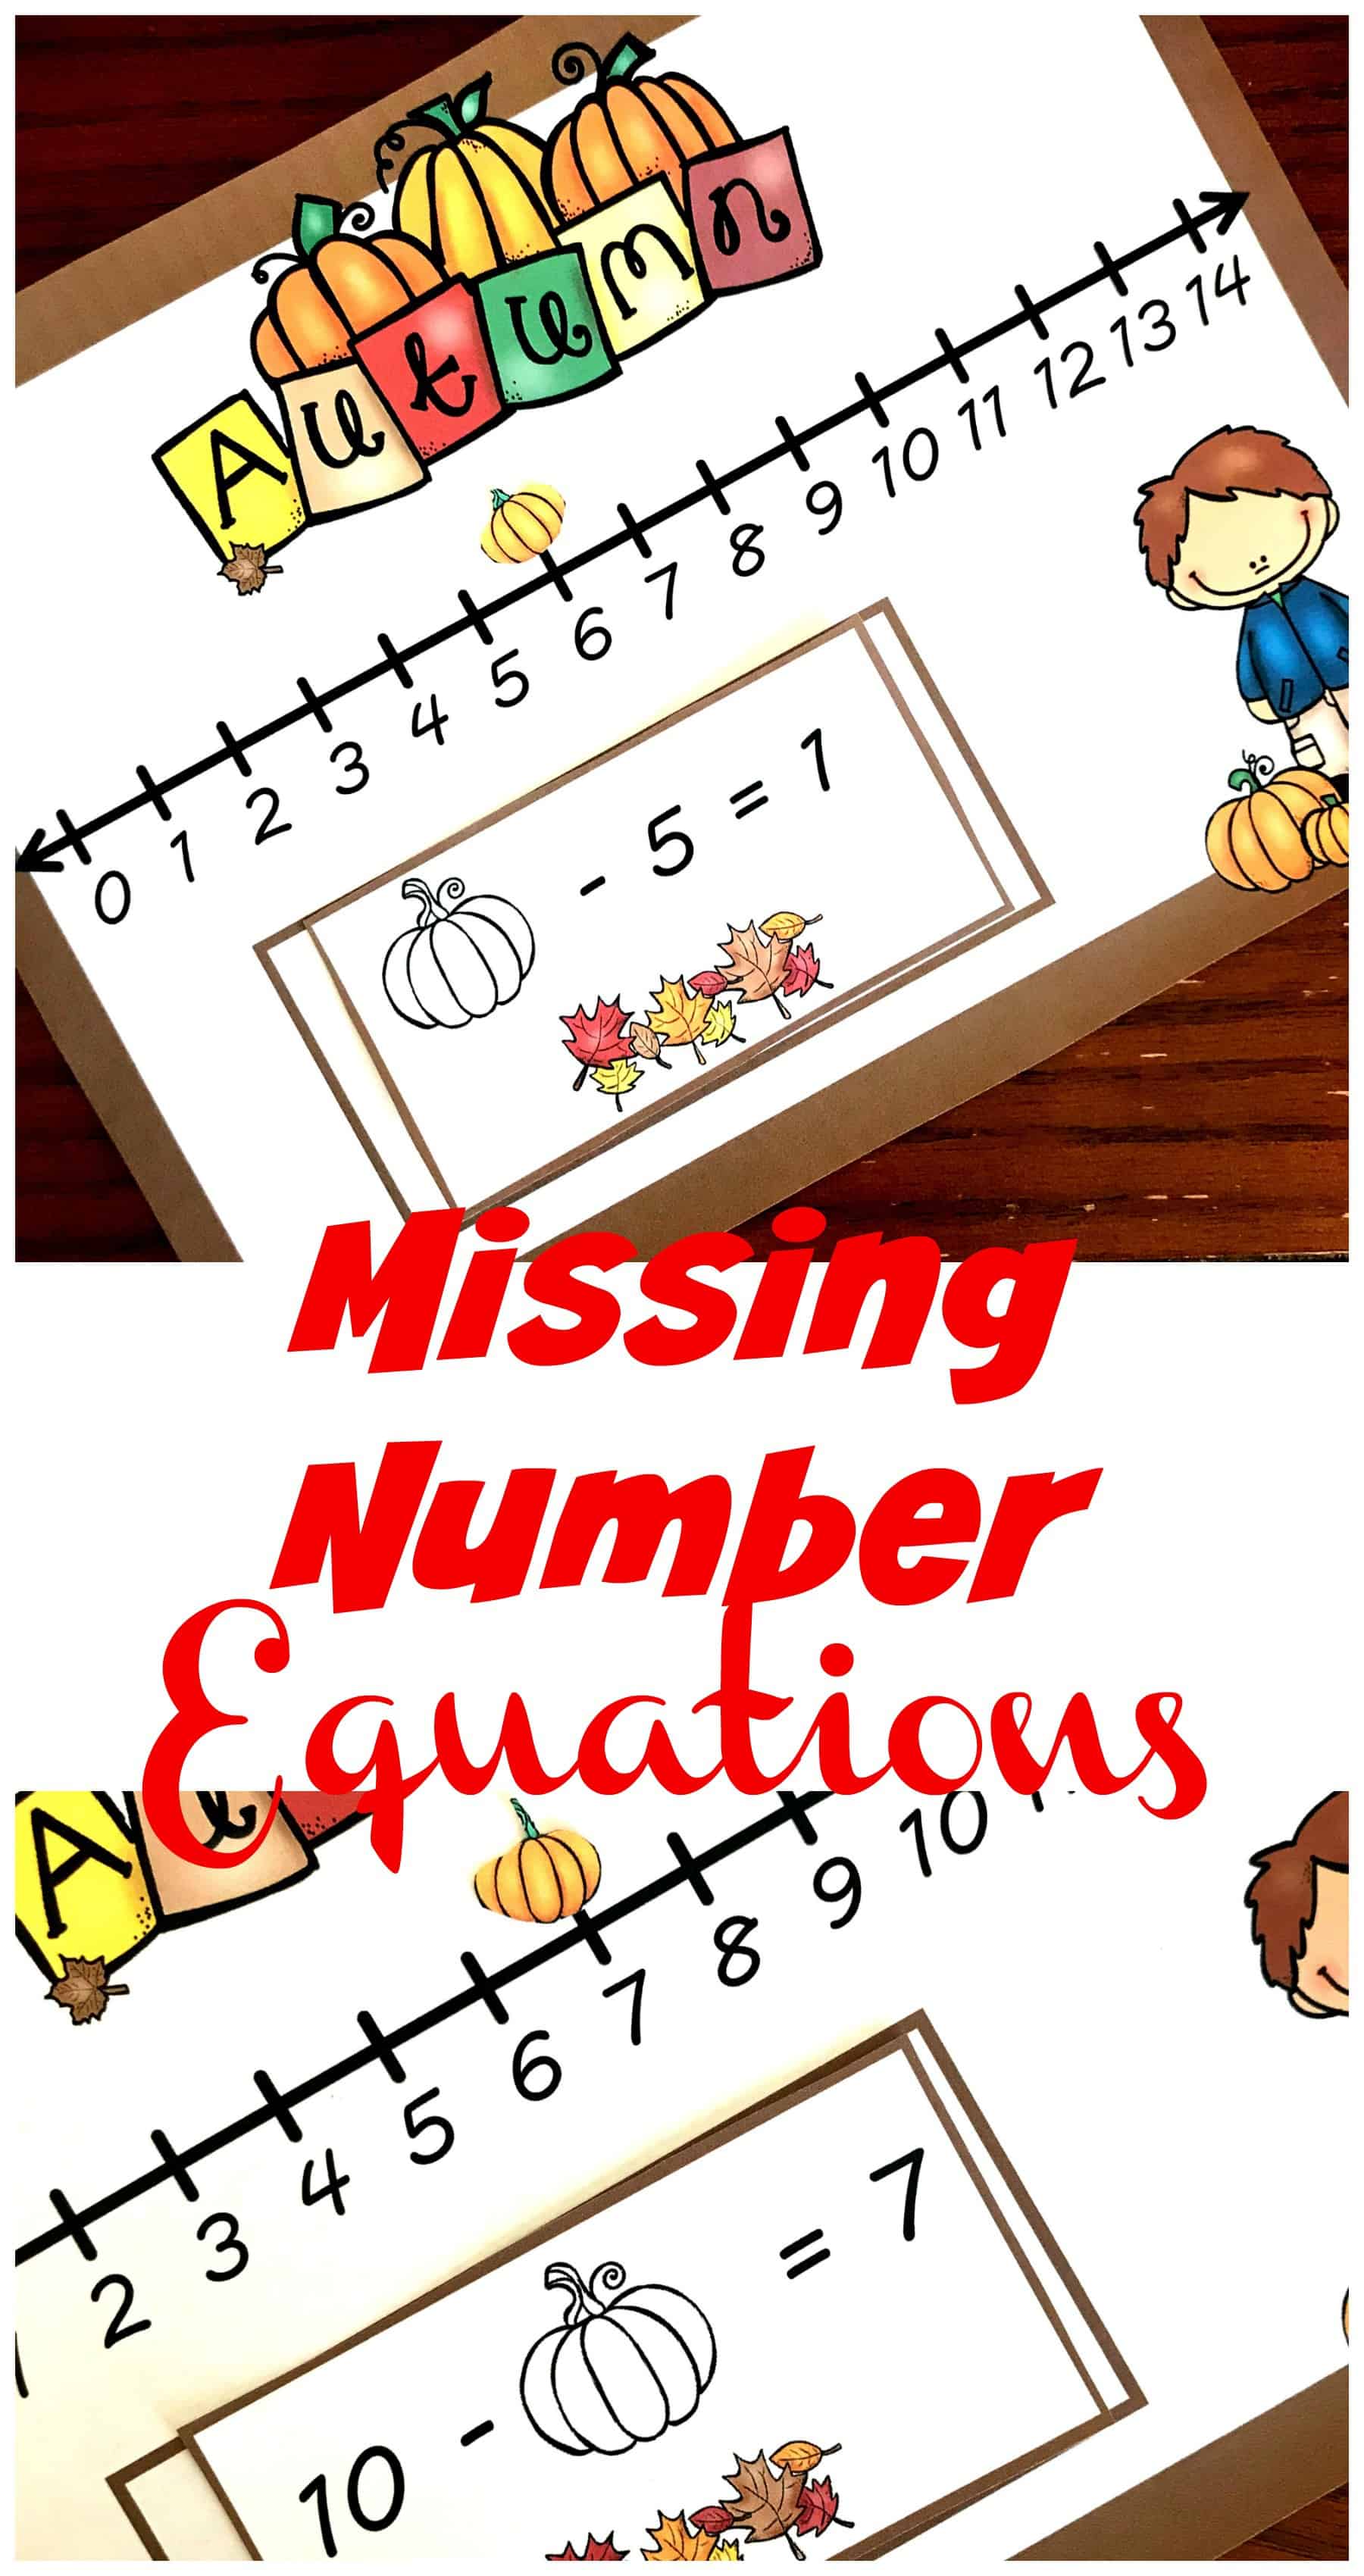 This fill in the missing number activity is a fun way to practice this skill. The children use number lines to find missing addends, subtrahend, or minuend.